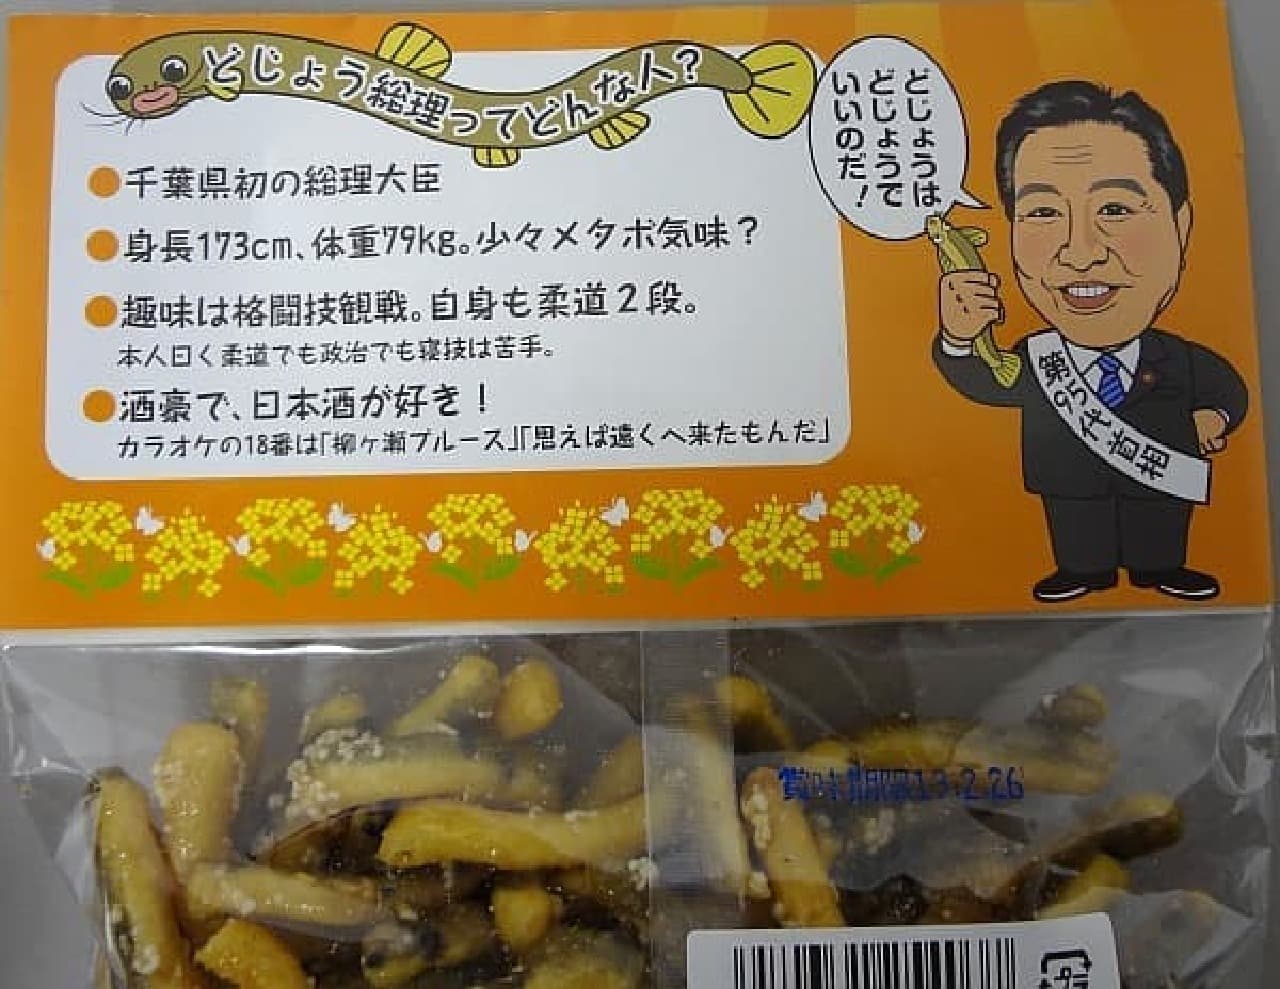 It is a good item that you can see what kind of person former Prime Minister Noda was.